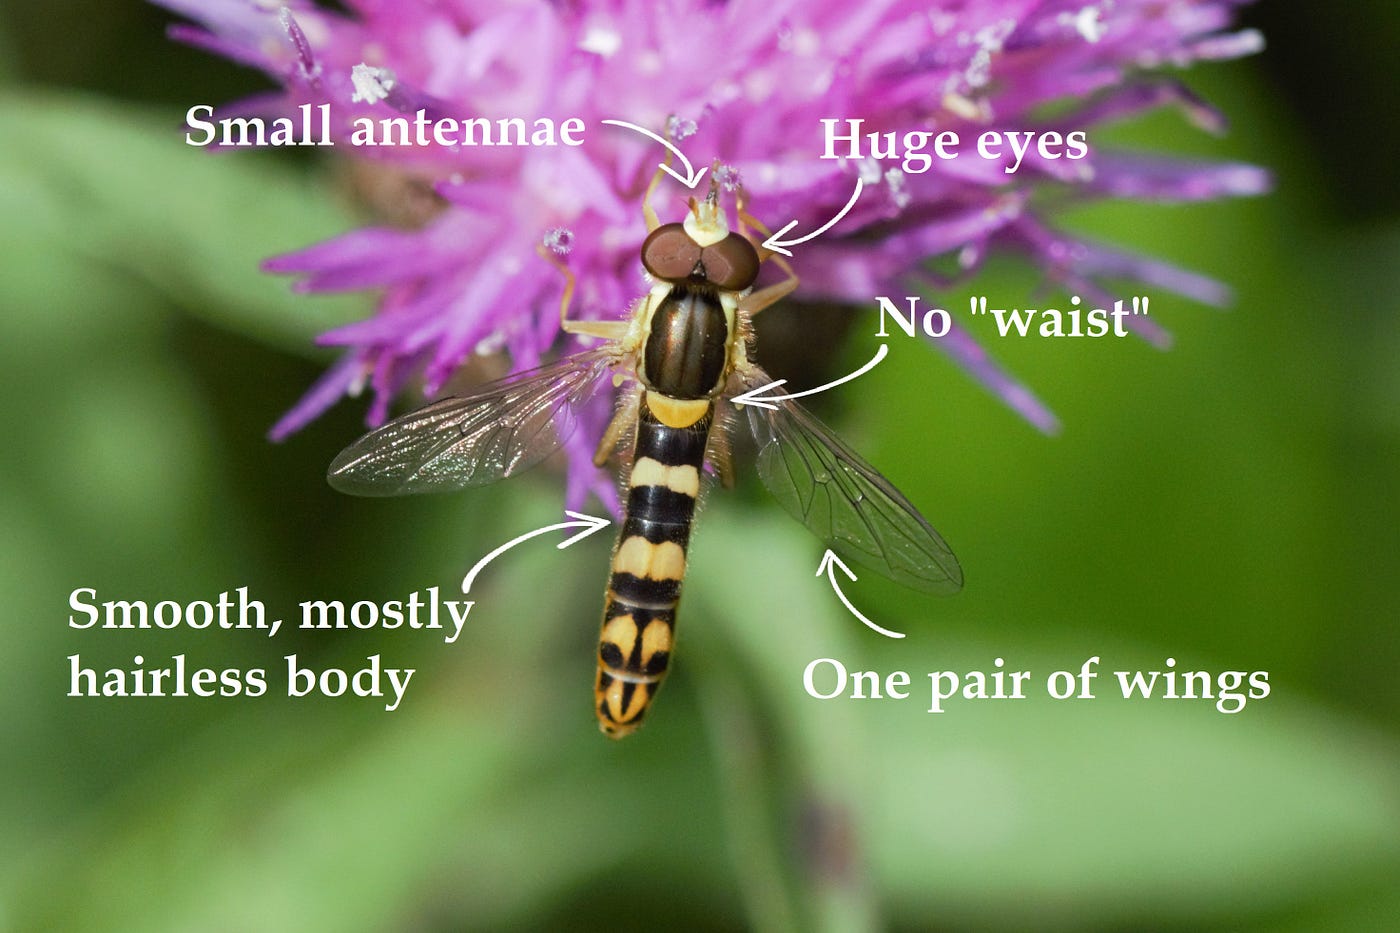 Bee vs wasp: what's the difference? - Discover Wildlife